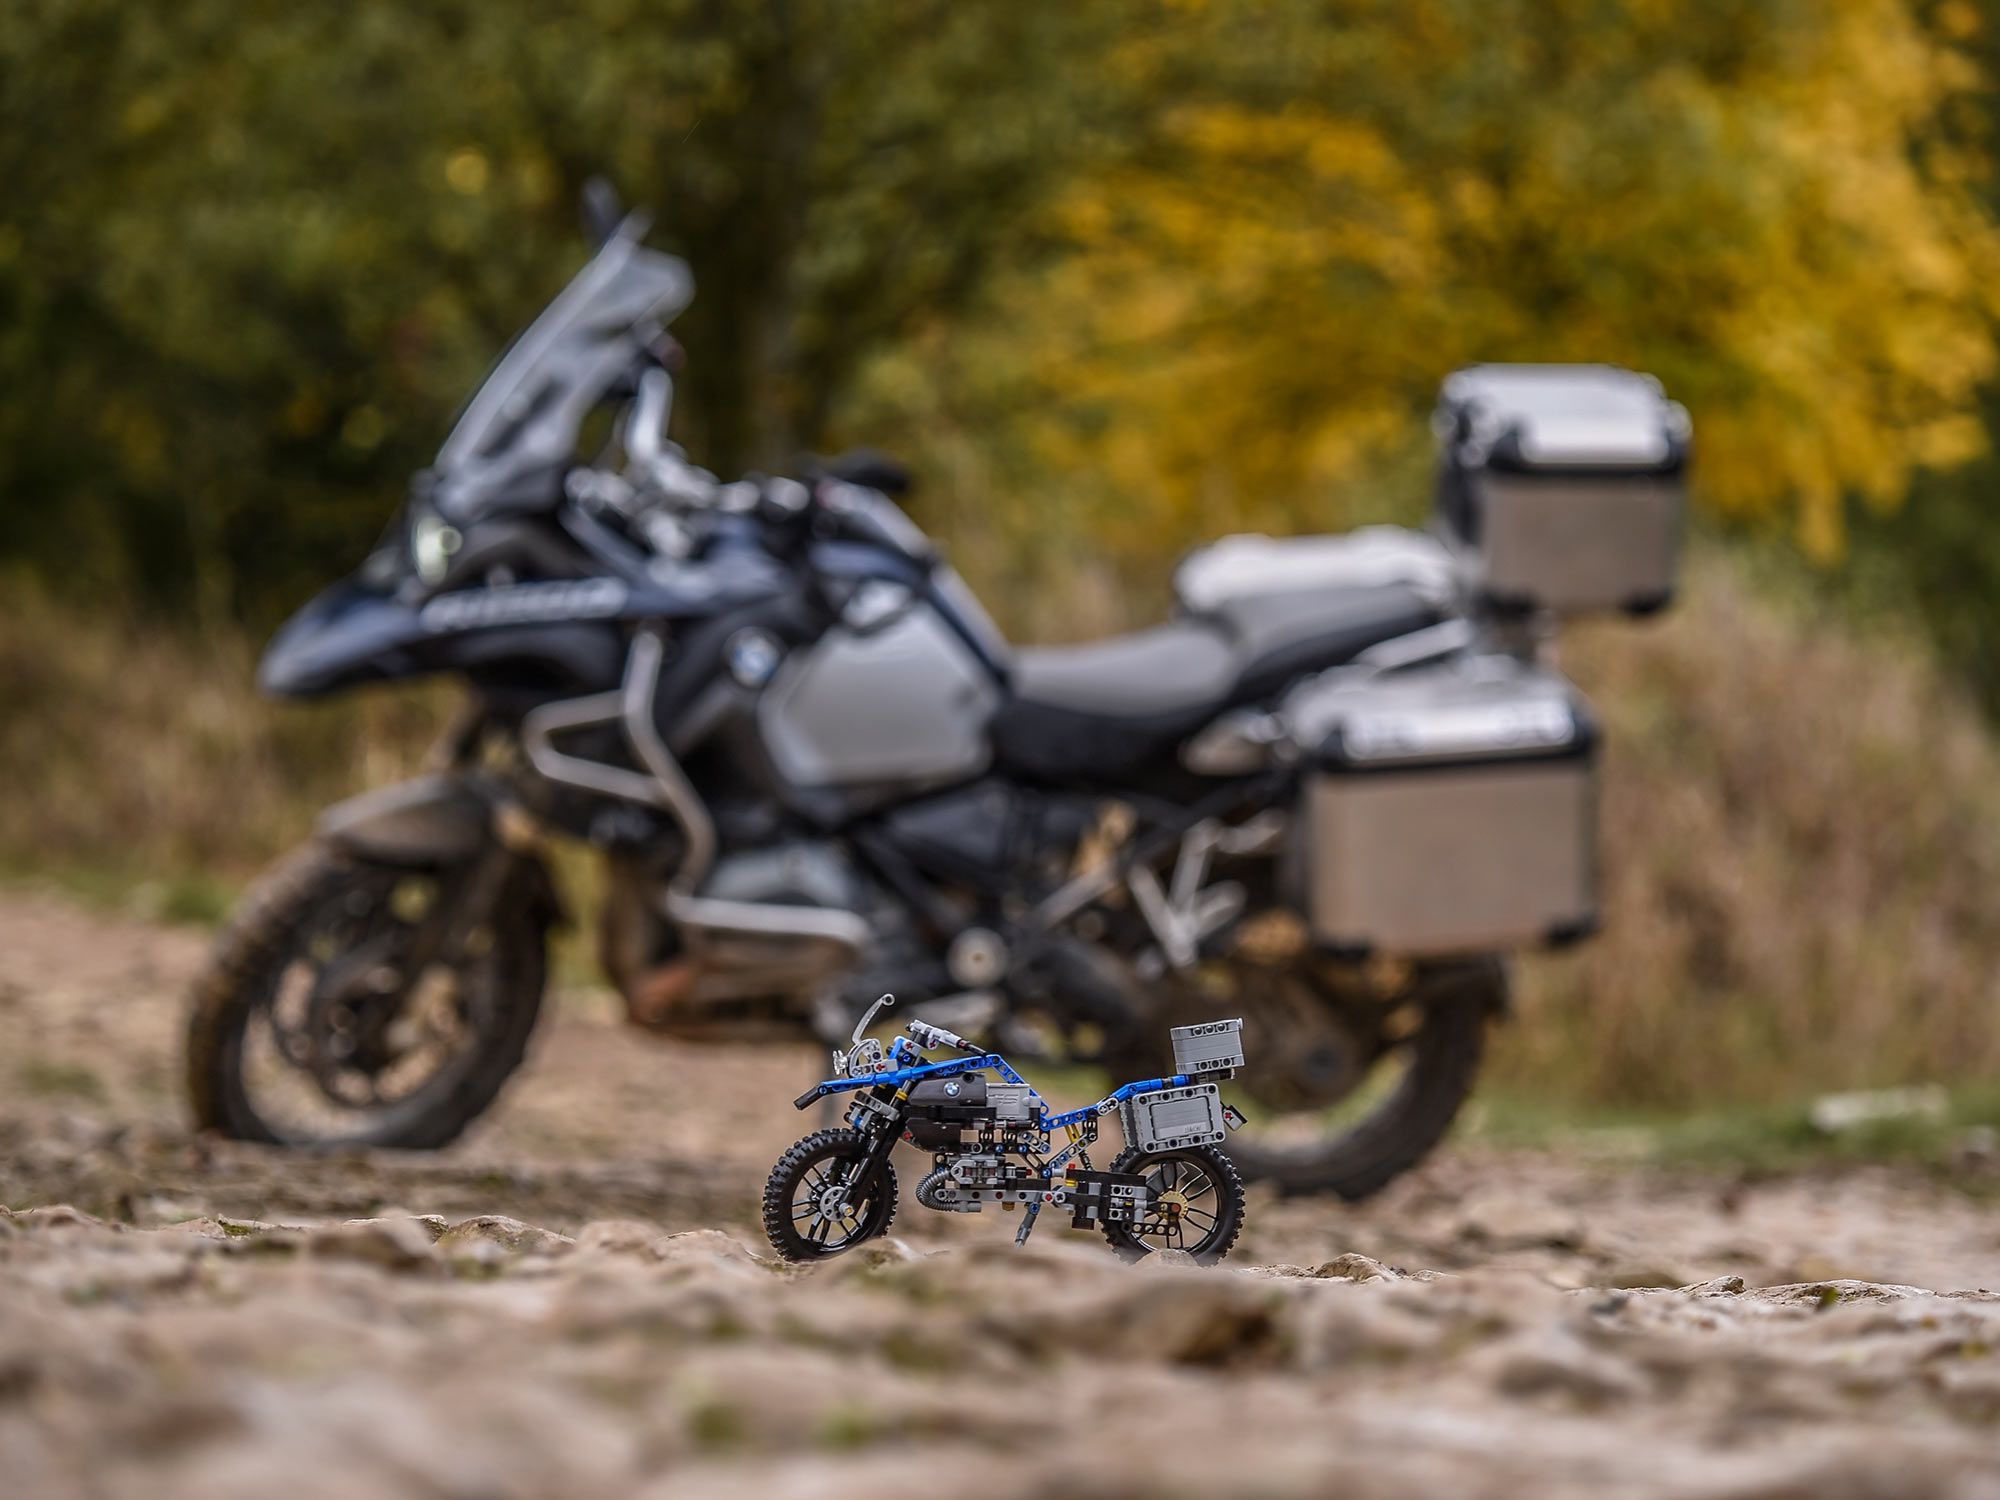 The BMW R 1200 GS Adventure Lego set nails the iconic beaked profile of the real deal.